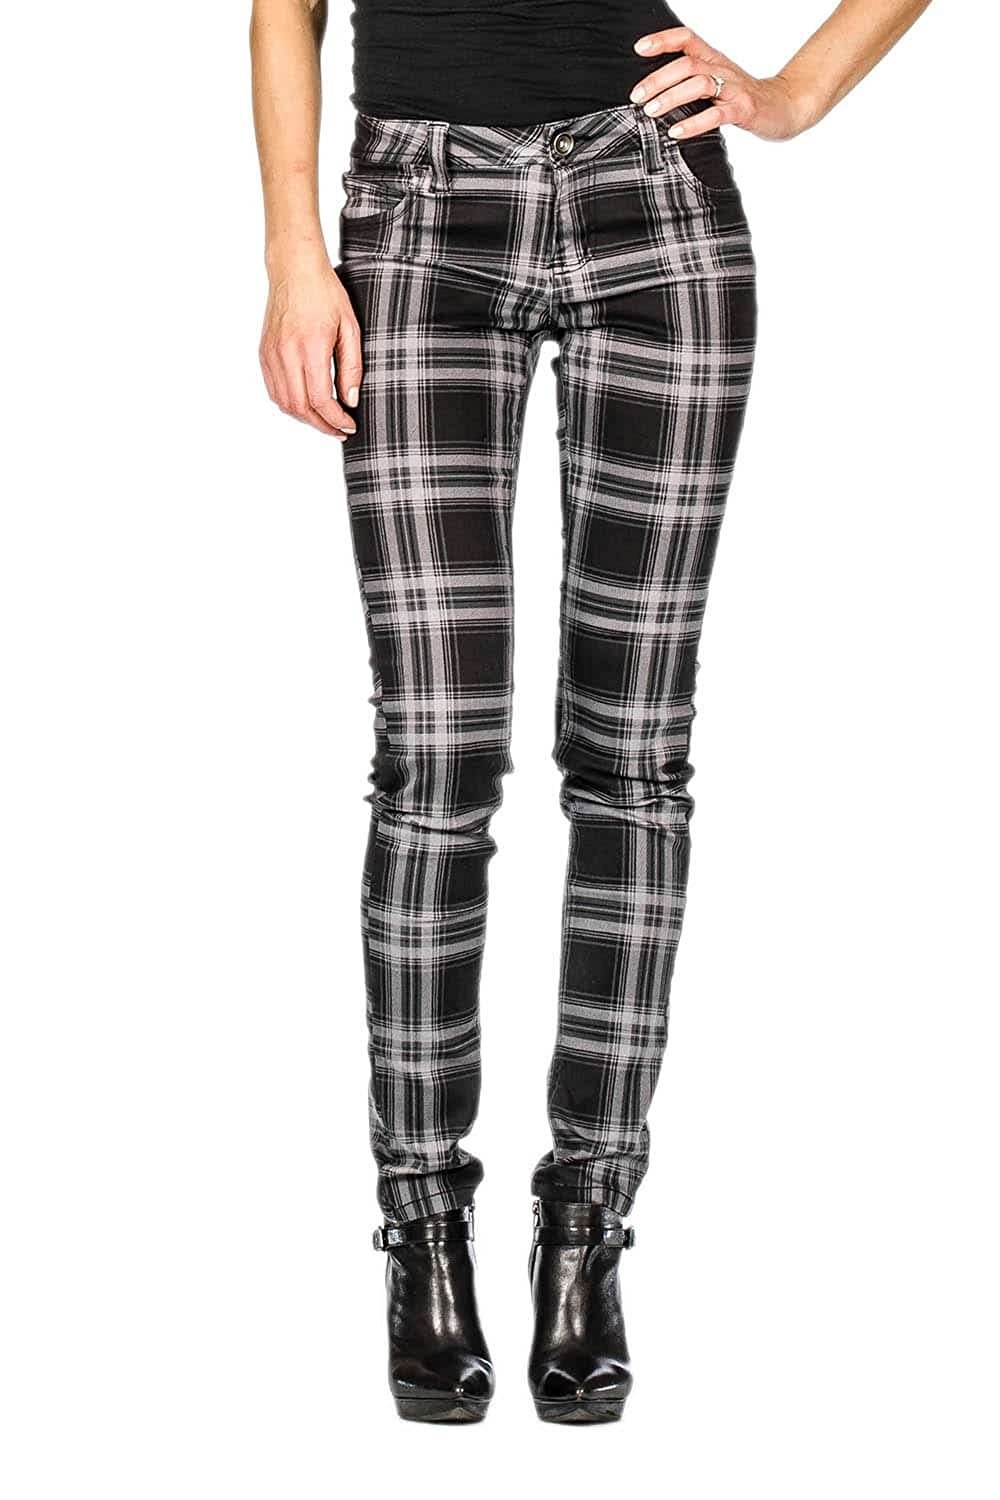 24 Pairs Of Skinny Jeans You'll Basically Never Want To Take Off